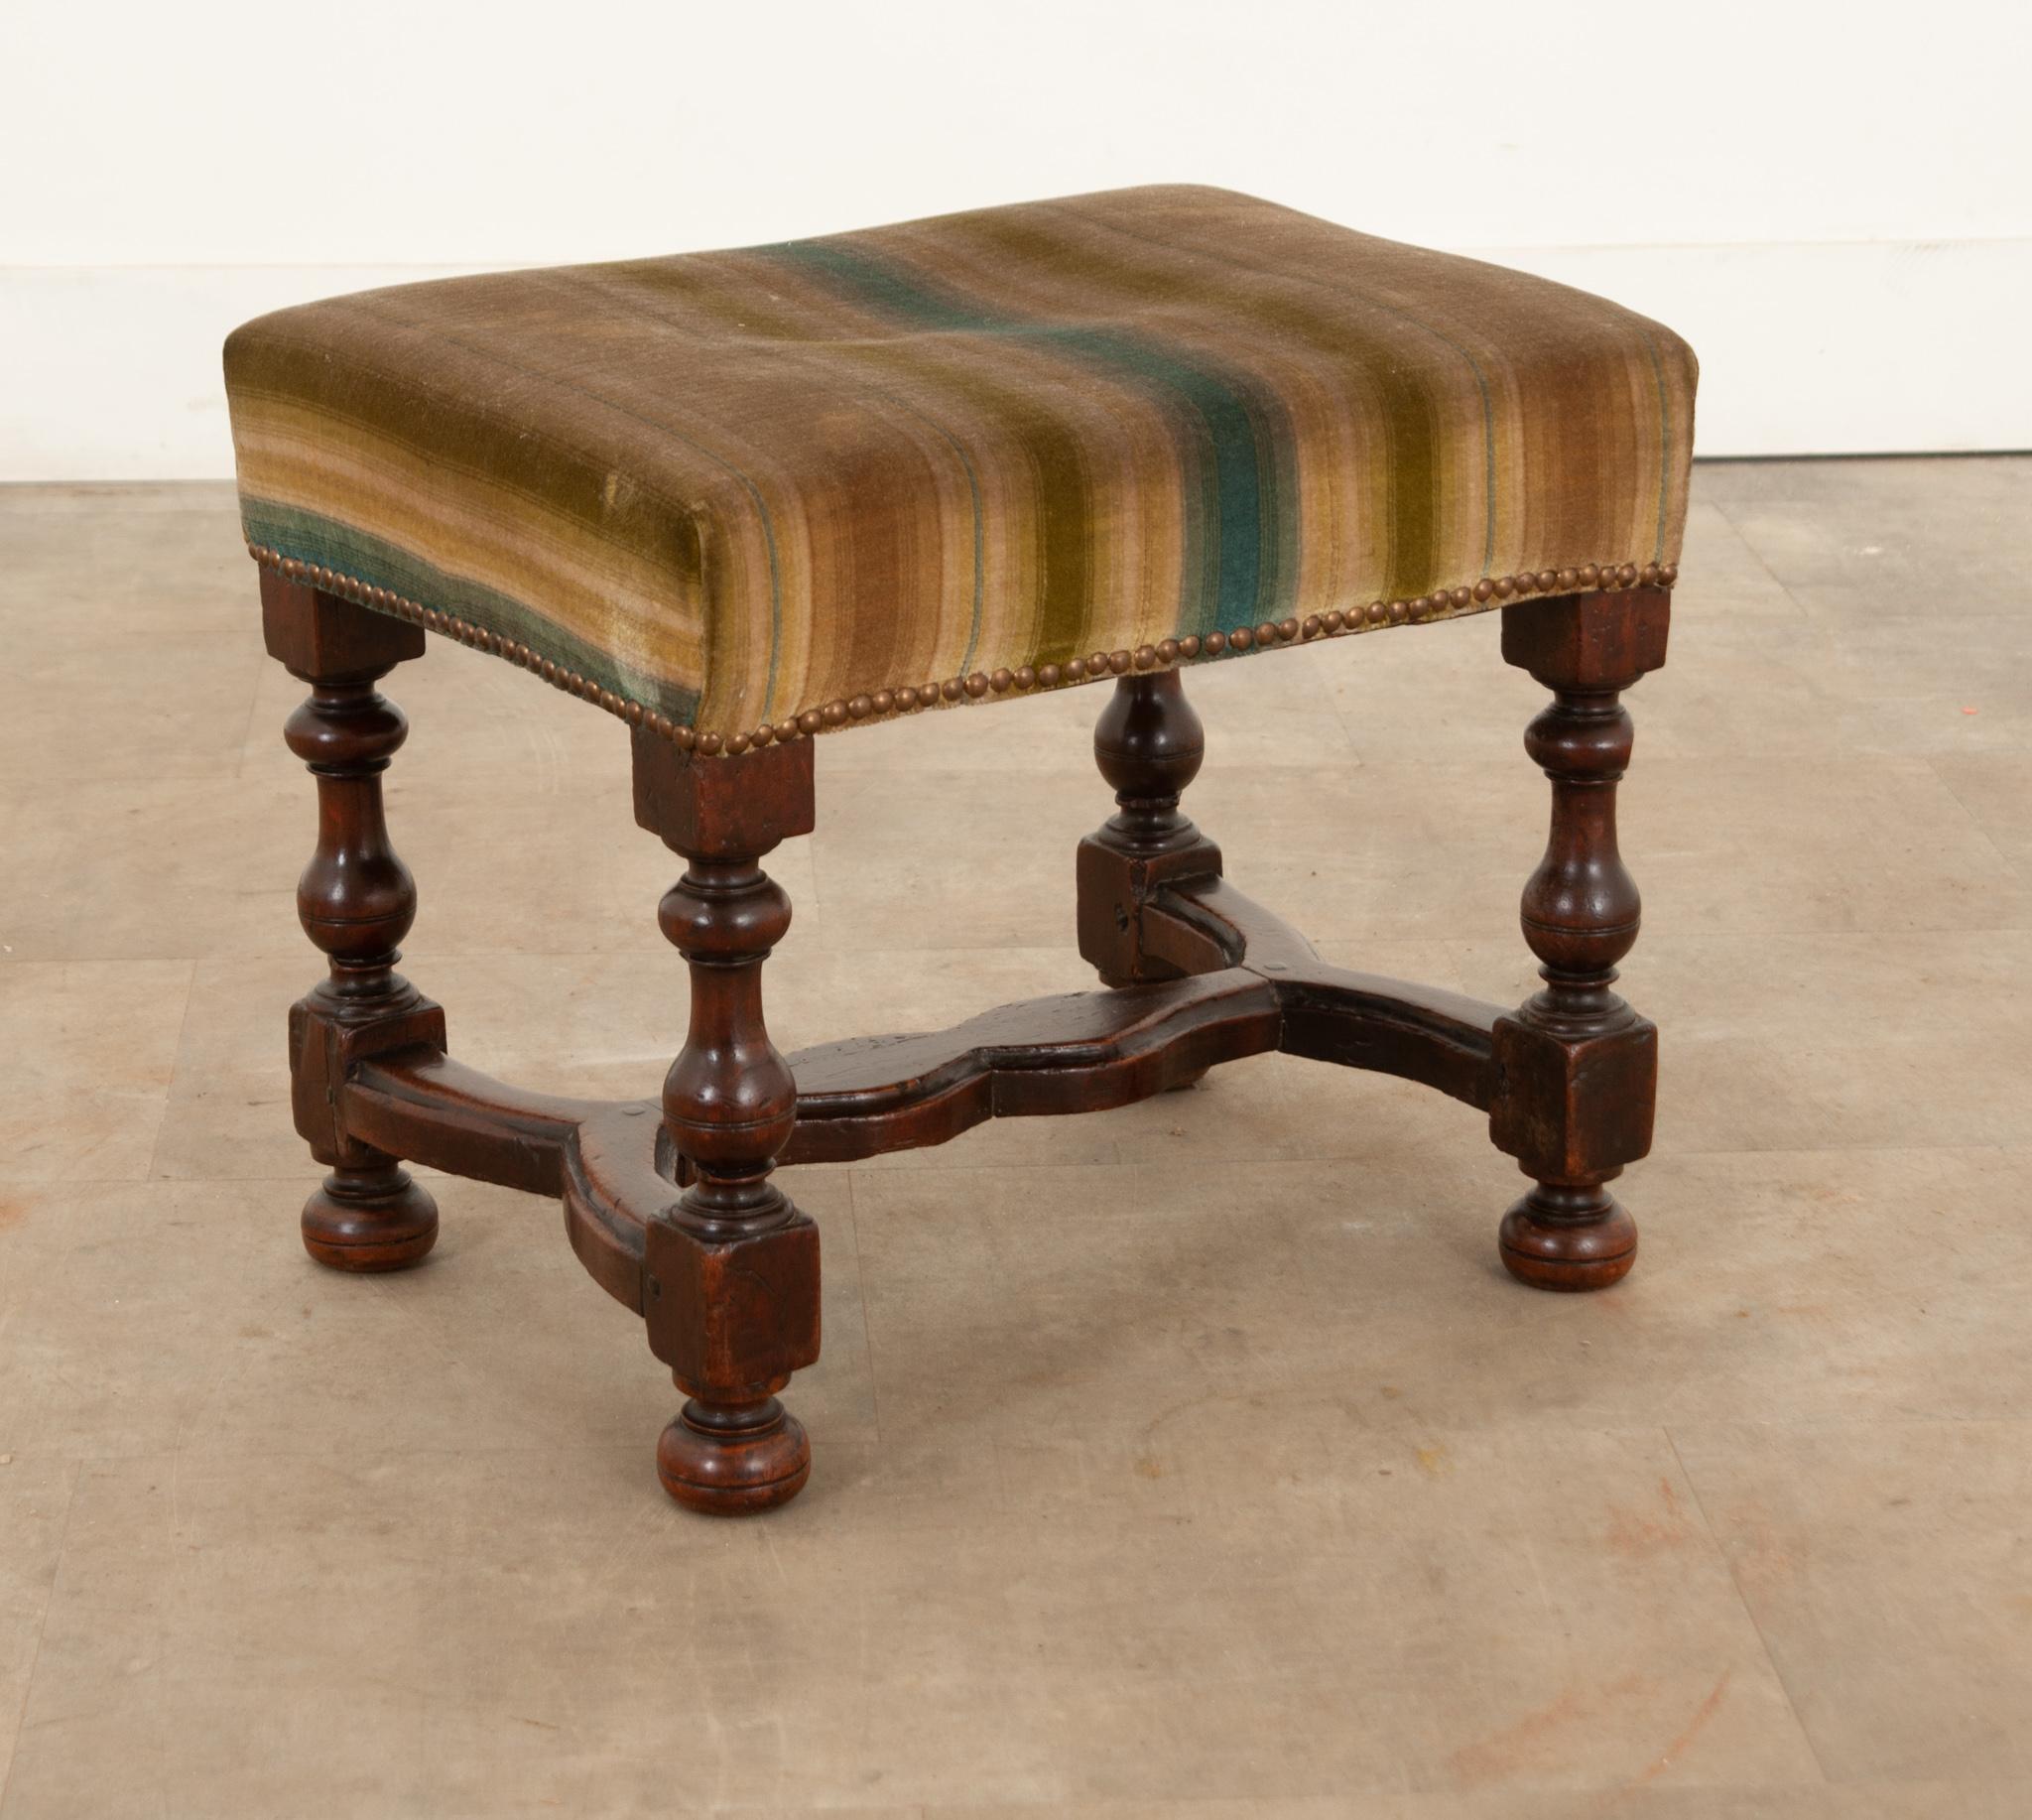 This stately yet petite stool is the perfect antique to add interest to any space. Upholstered with brown, olive, and teal striped velvet  in excellent, used condition and held with round brass rivets. The heavy solid walnut frame showcases